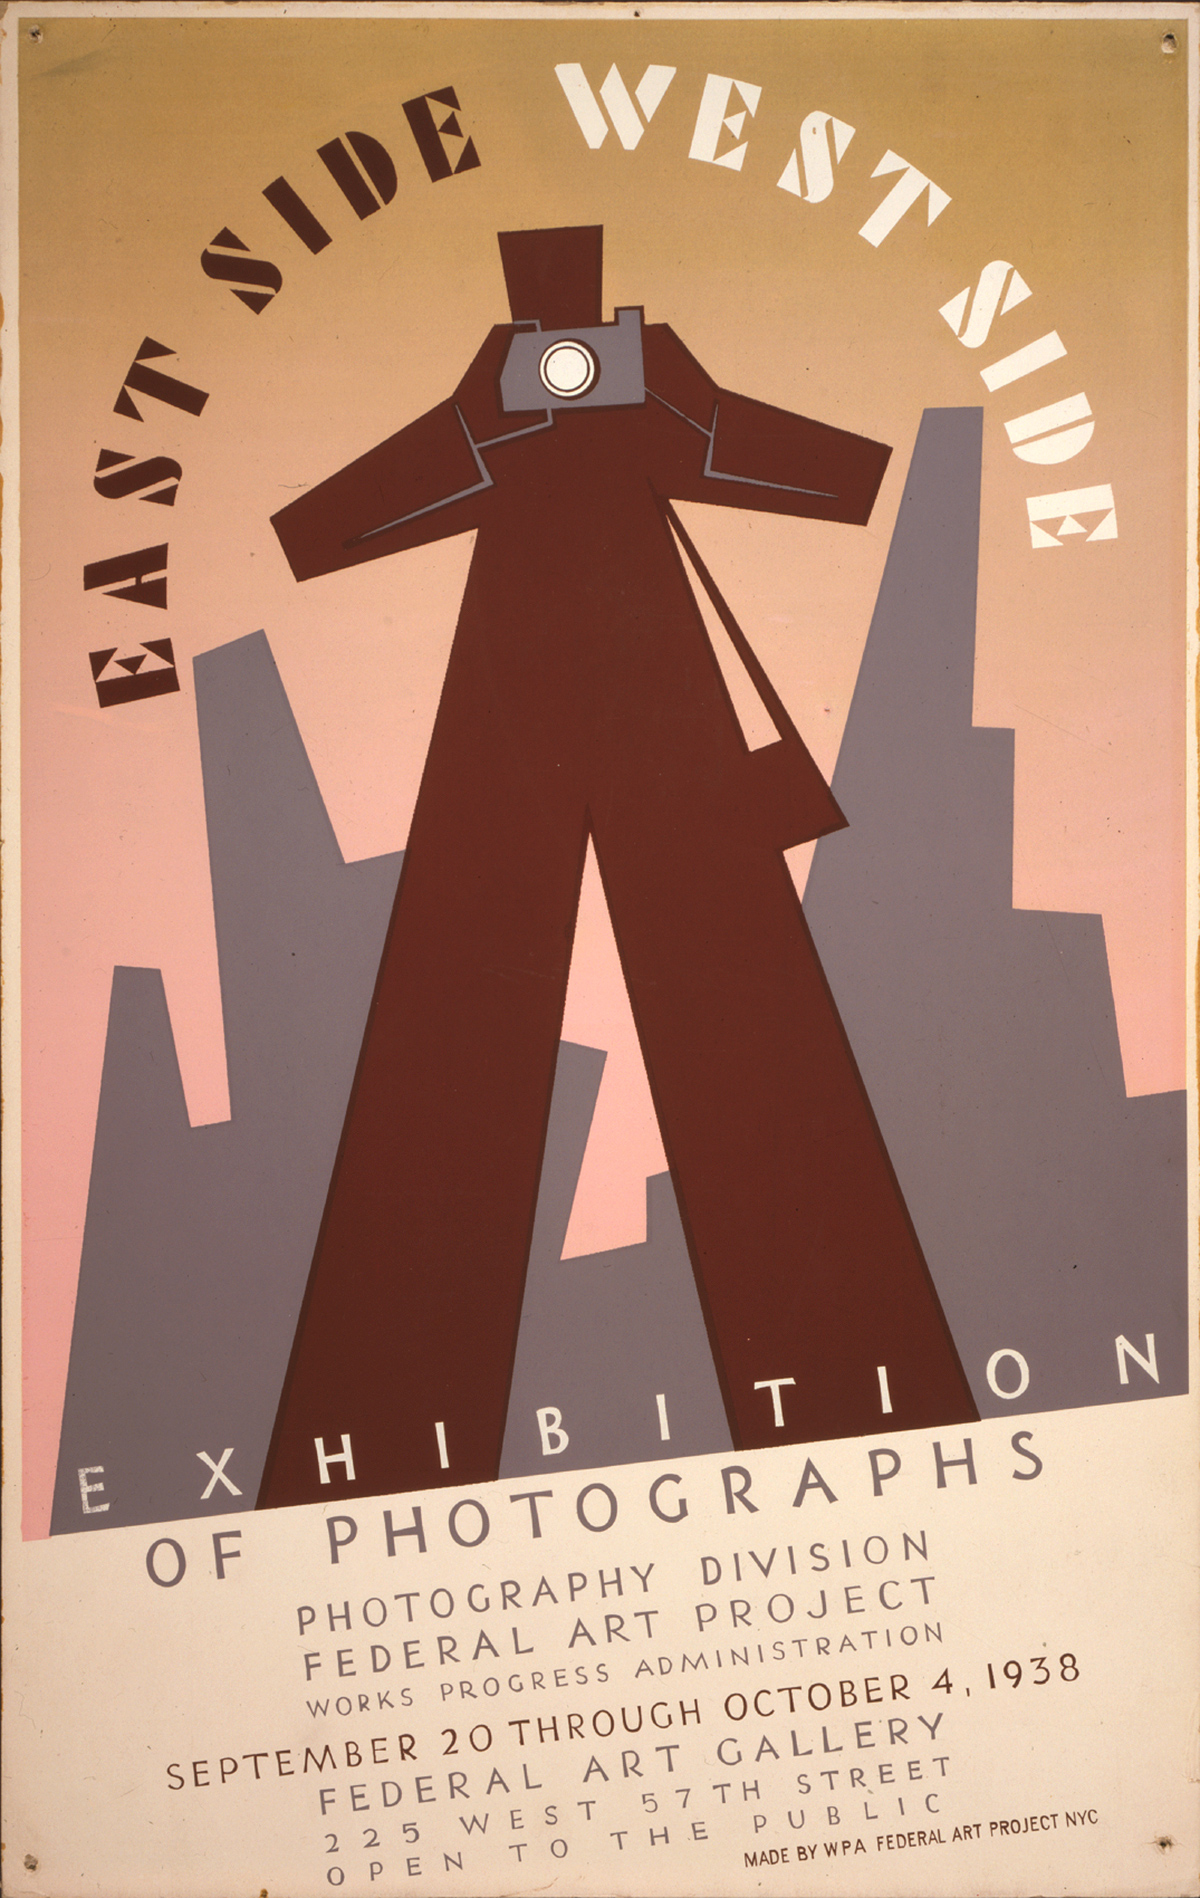 East Side West Side Exhibition of Photographs par Anthony Velonis, 1938